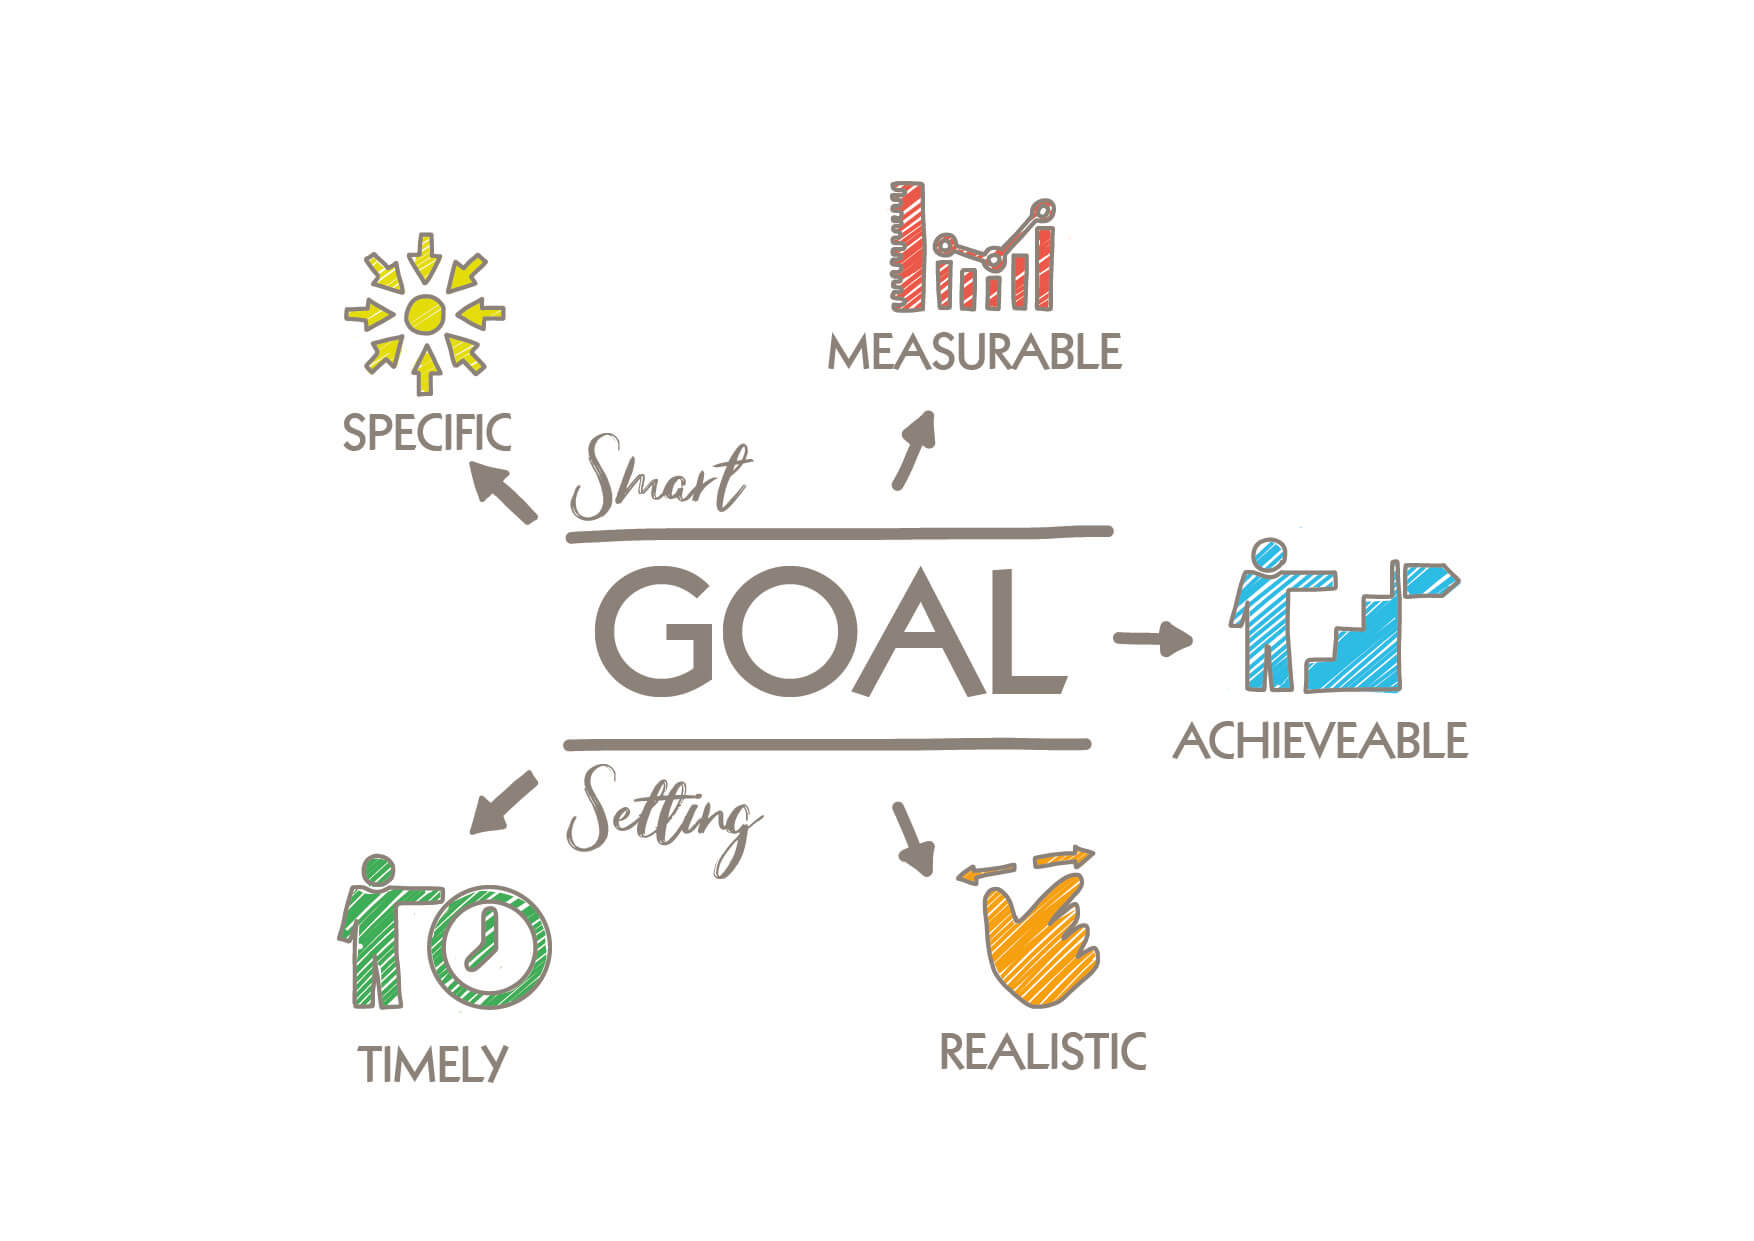 Infographic on SMART goals